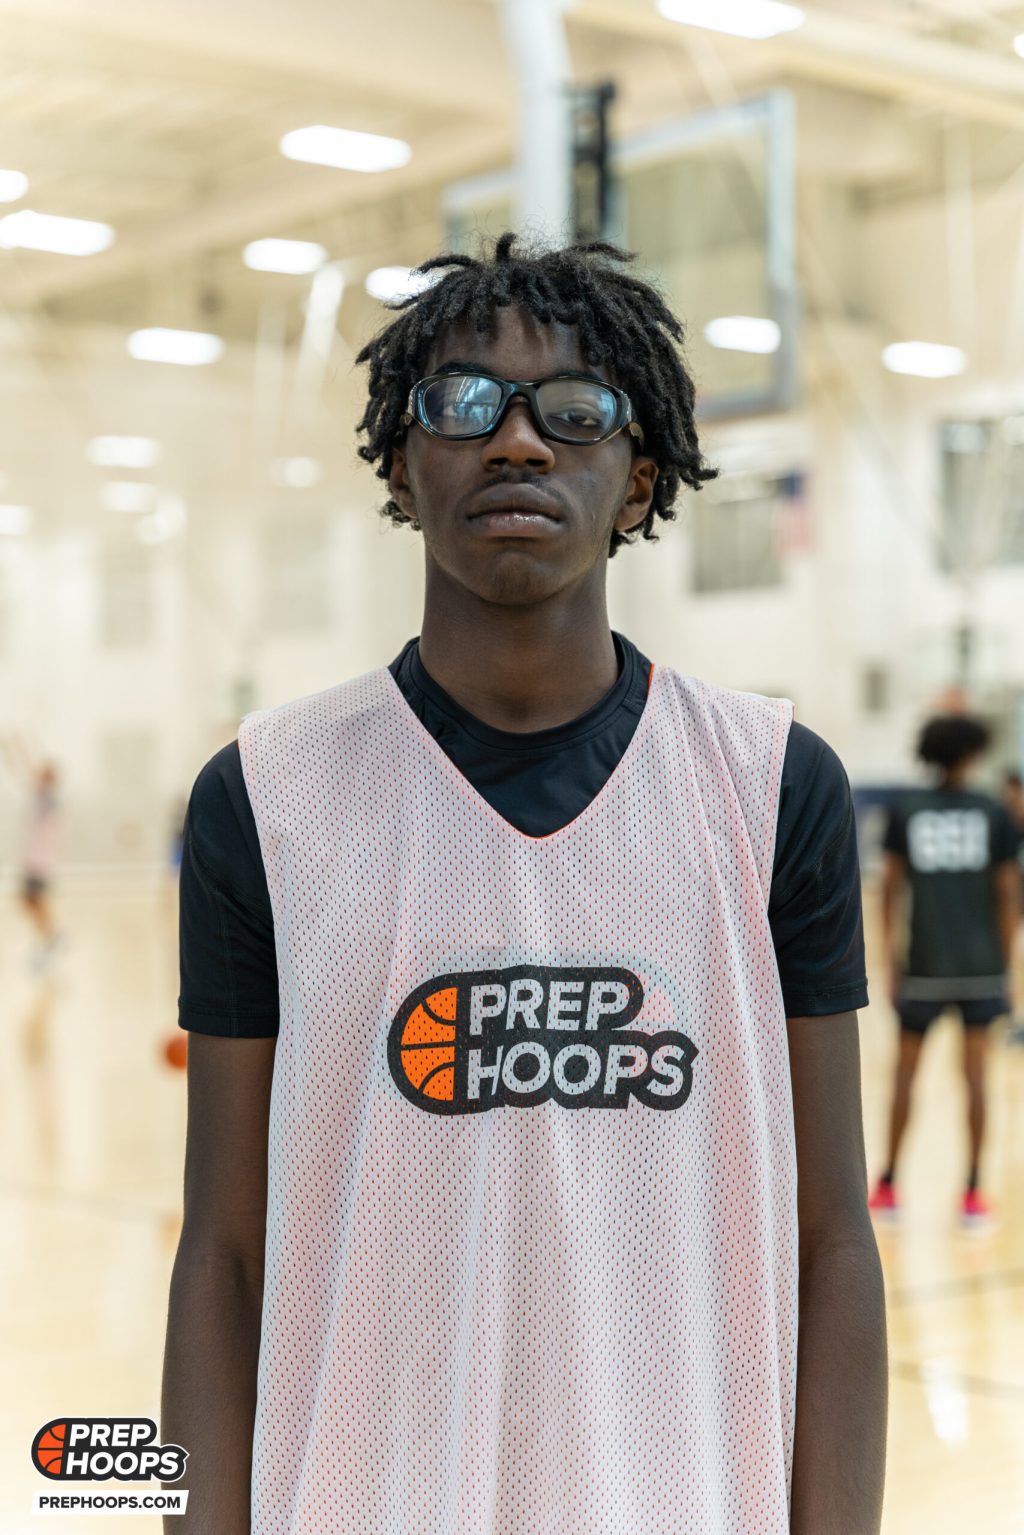 2026 Under the Radar Guards to Watch this Season